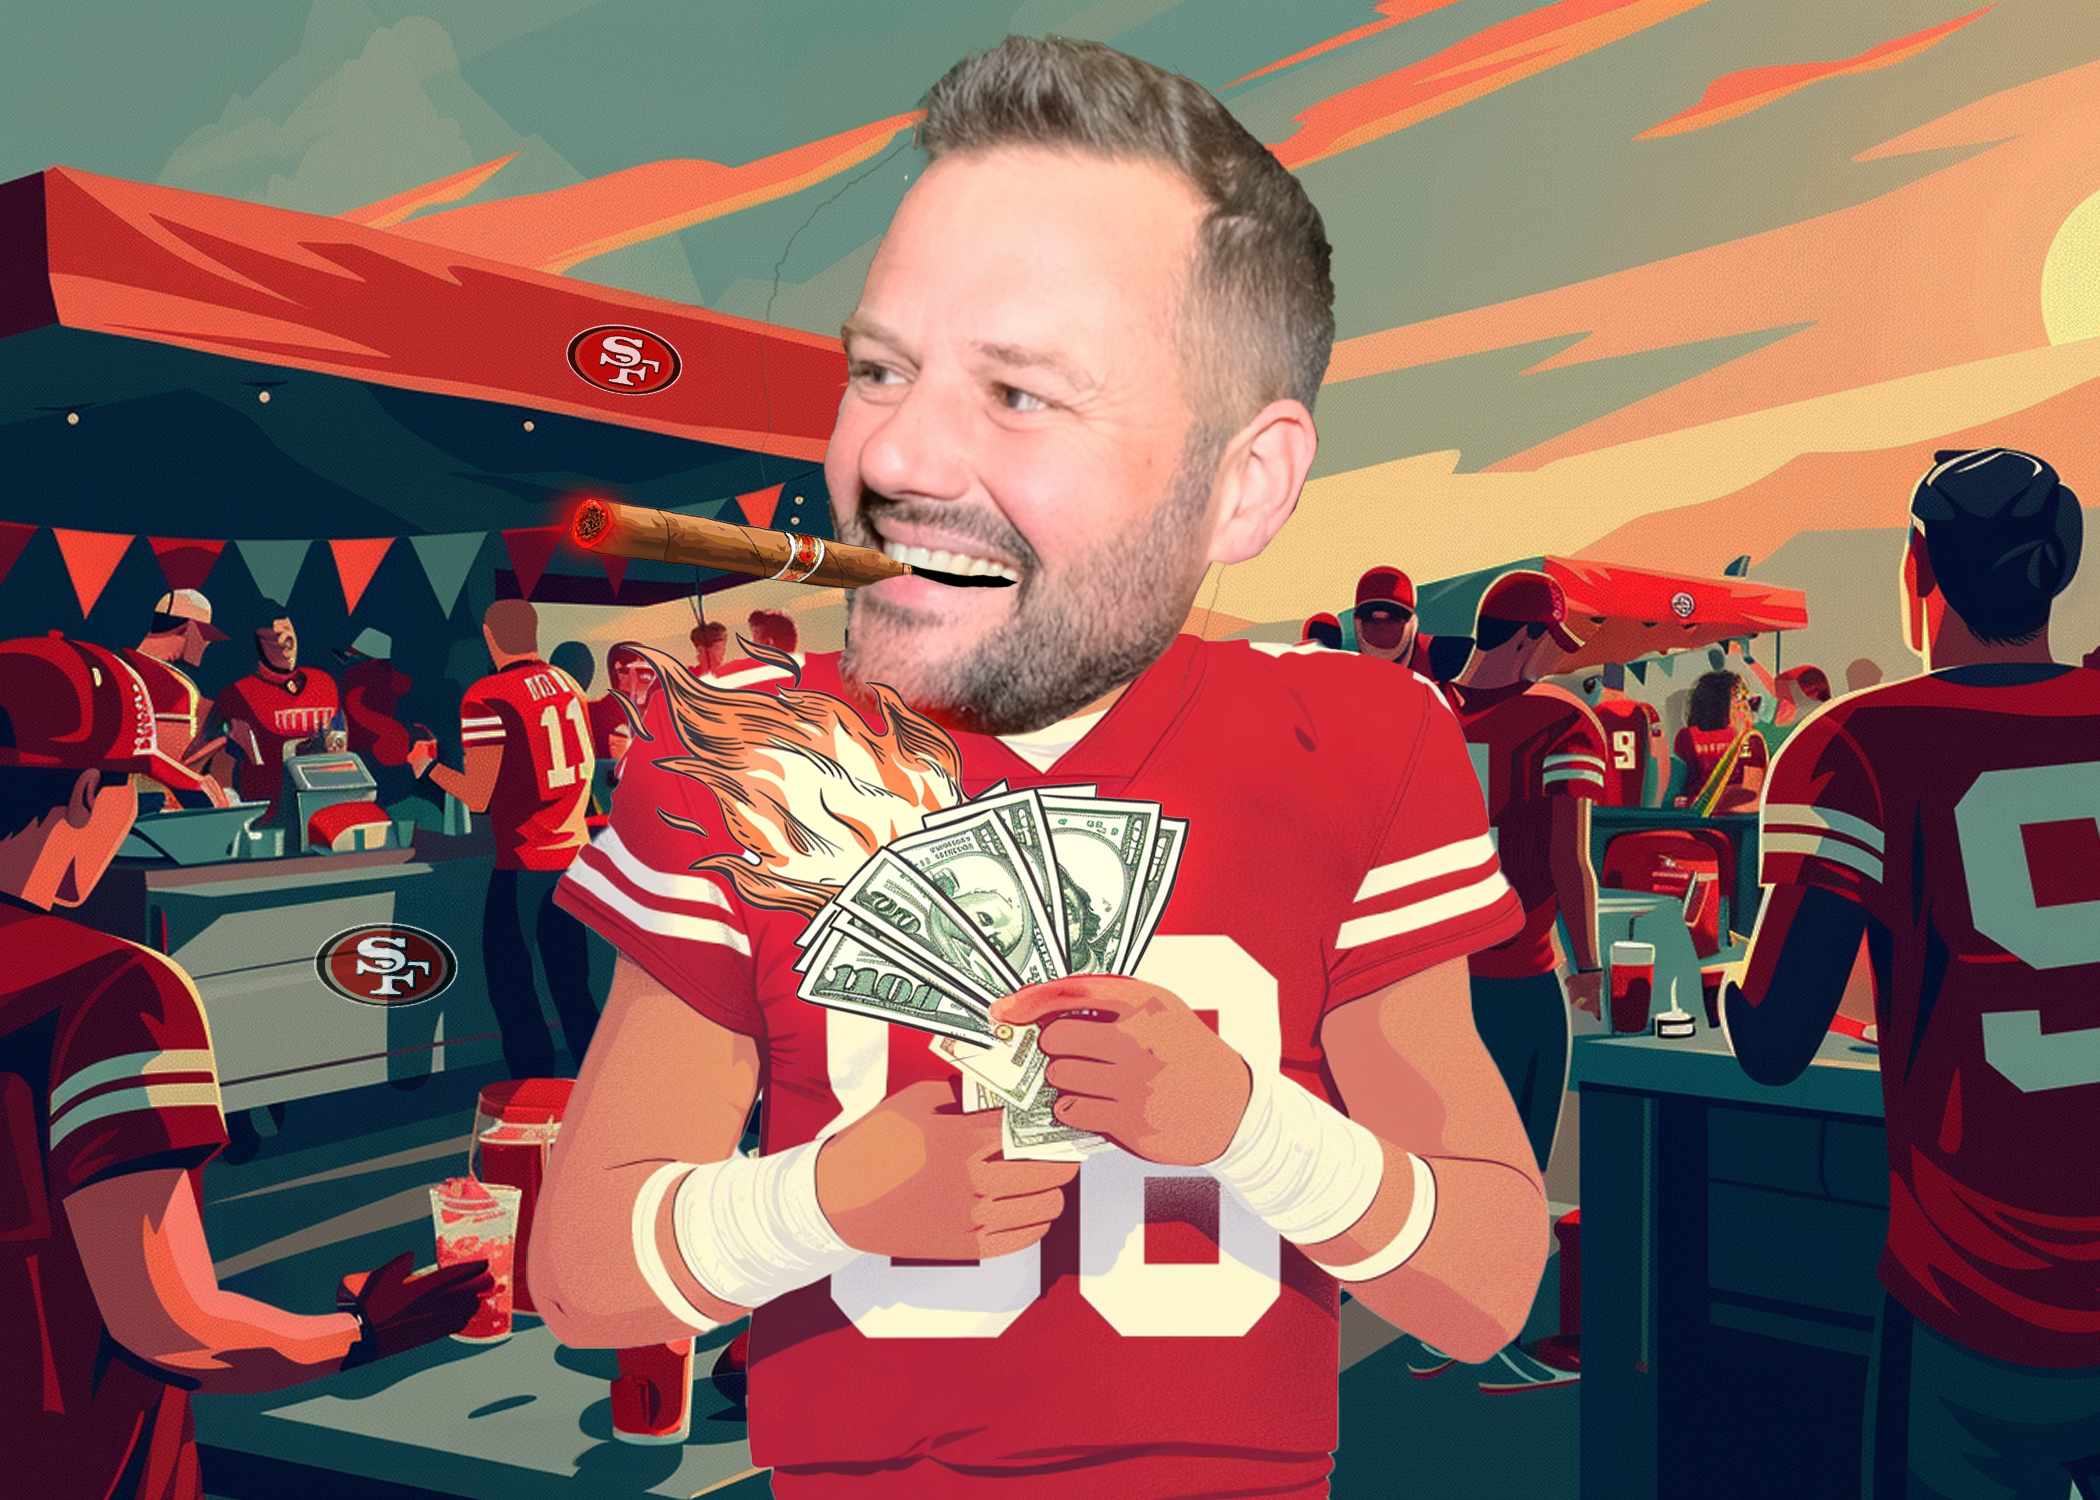 A smiling Matt Haney with a cigar is depicted with a football player body, holding burning money, at a vibrant outdoor event with people in red jerseys and team banners.